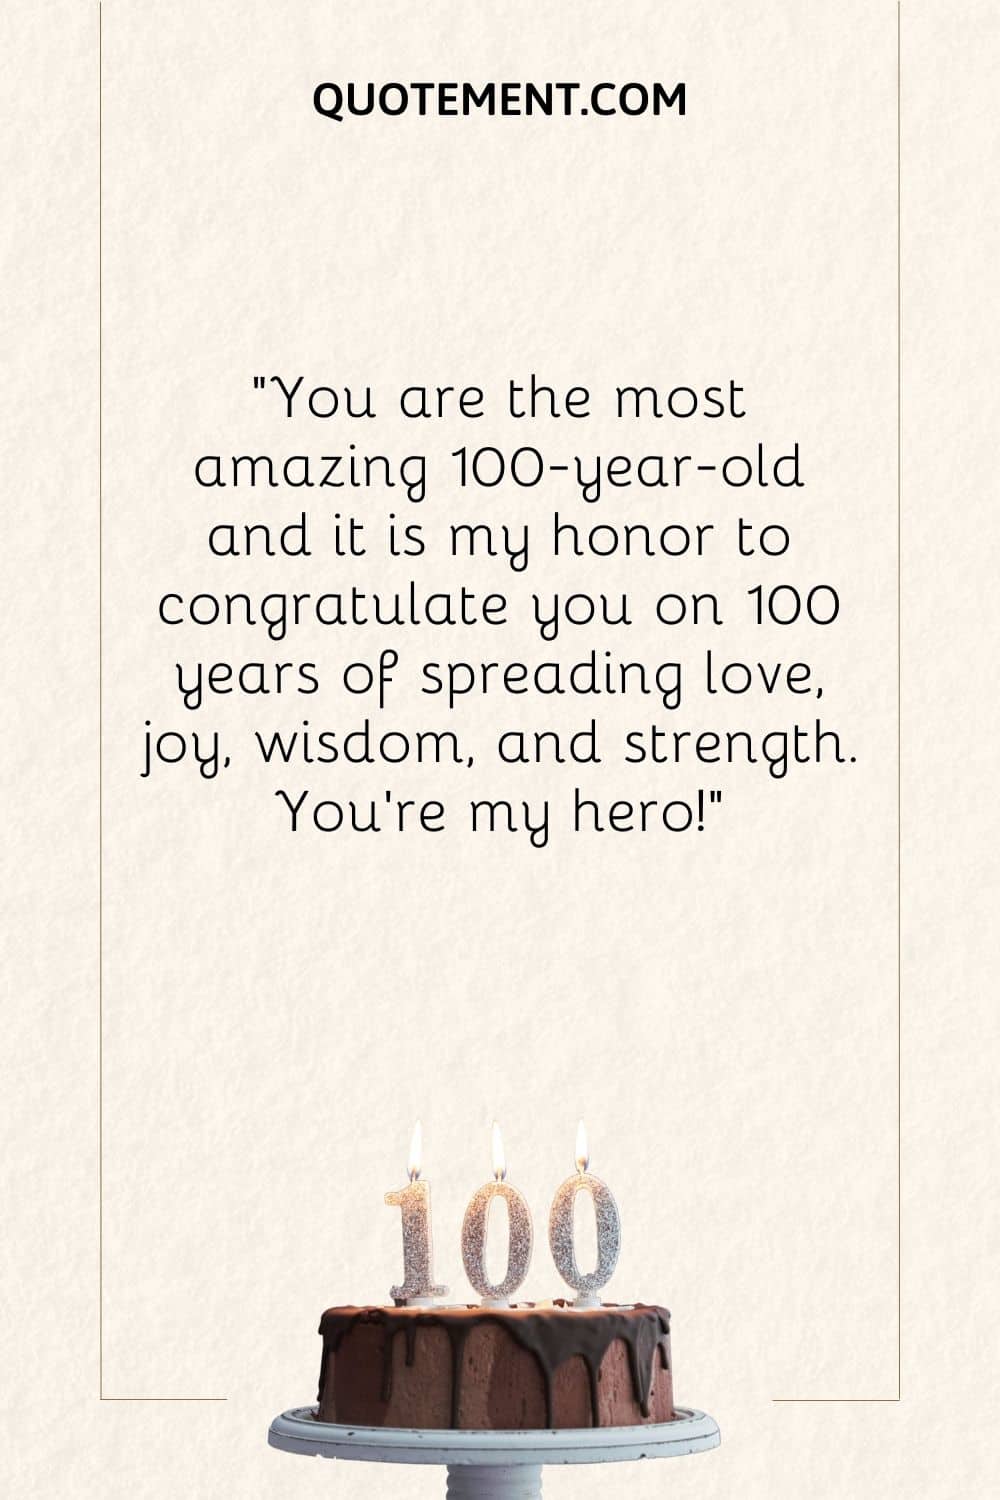 You are the most amazing 100-year-old